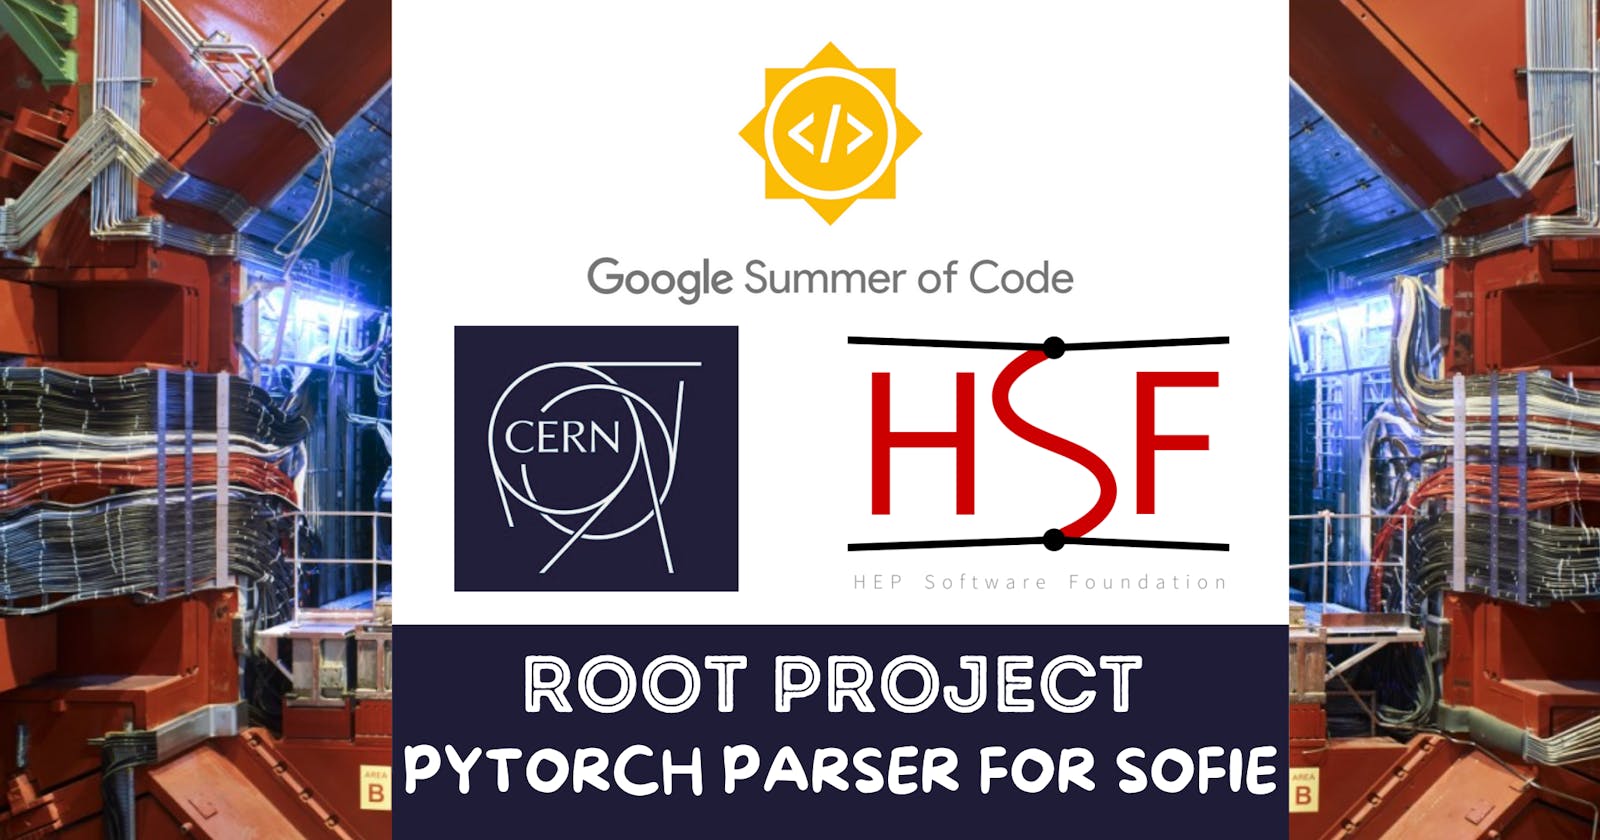 Root-Project: PyTorch Parser for SOFIE